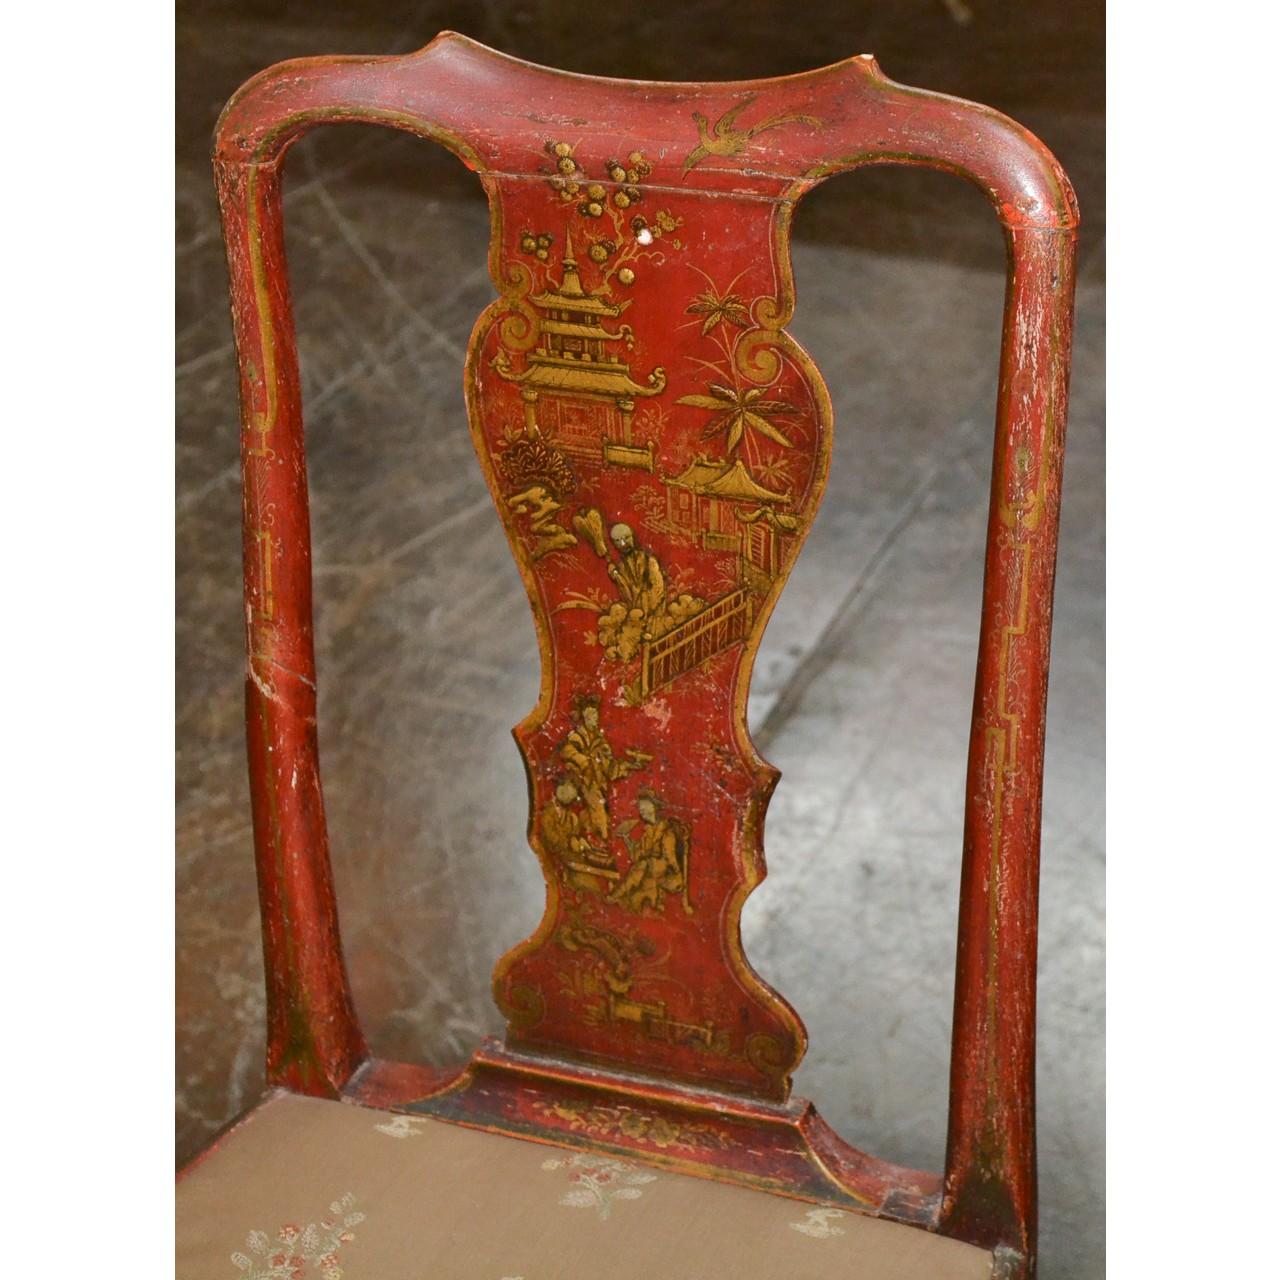 Two highly decorative 19th century English Queen Ann style side chairs with superb red and gold chinoiserie depicting Chinese motif landscape scenes with pagodas and Oriental figures. Shaped crest rails and splat backs. The front legs of cabriole